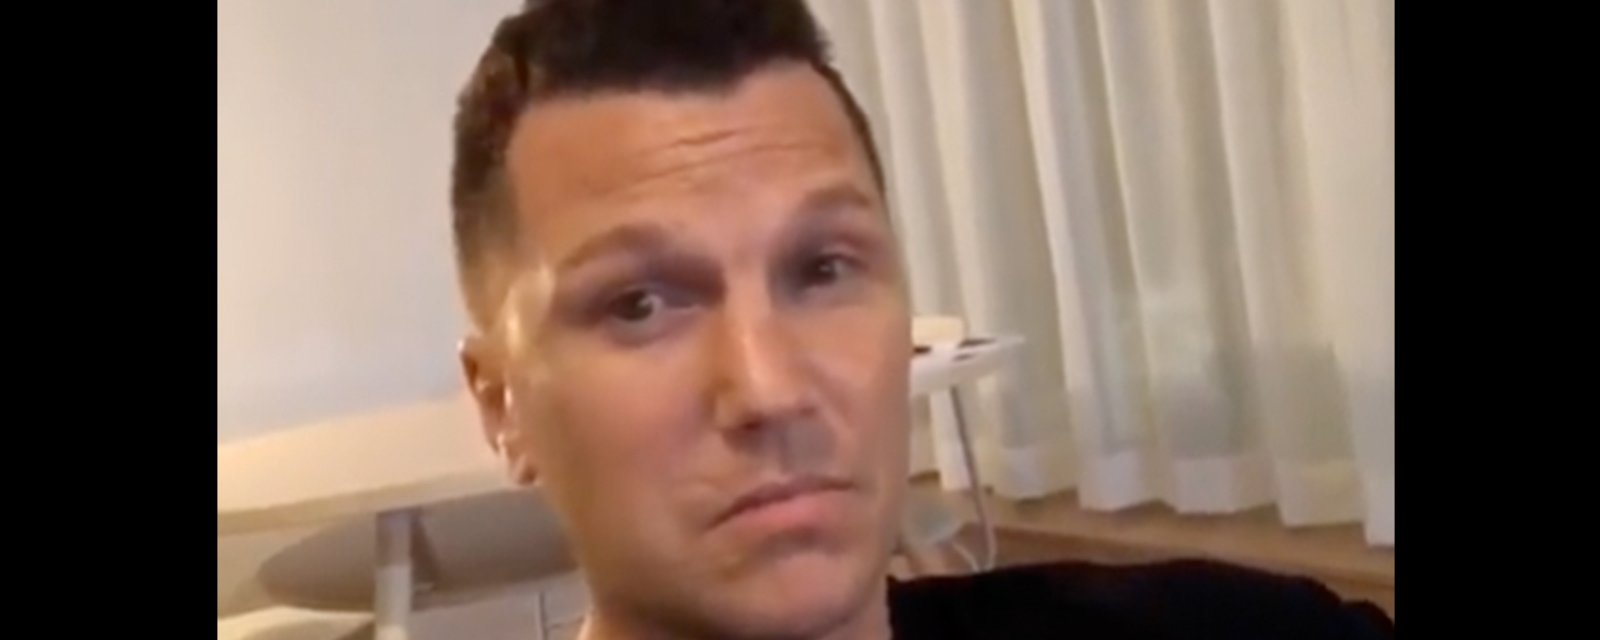 Sean Avery chirps Marchand over social media